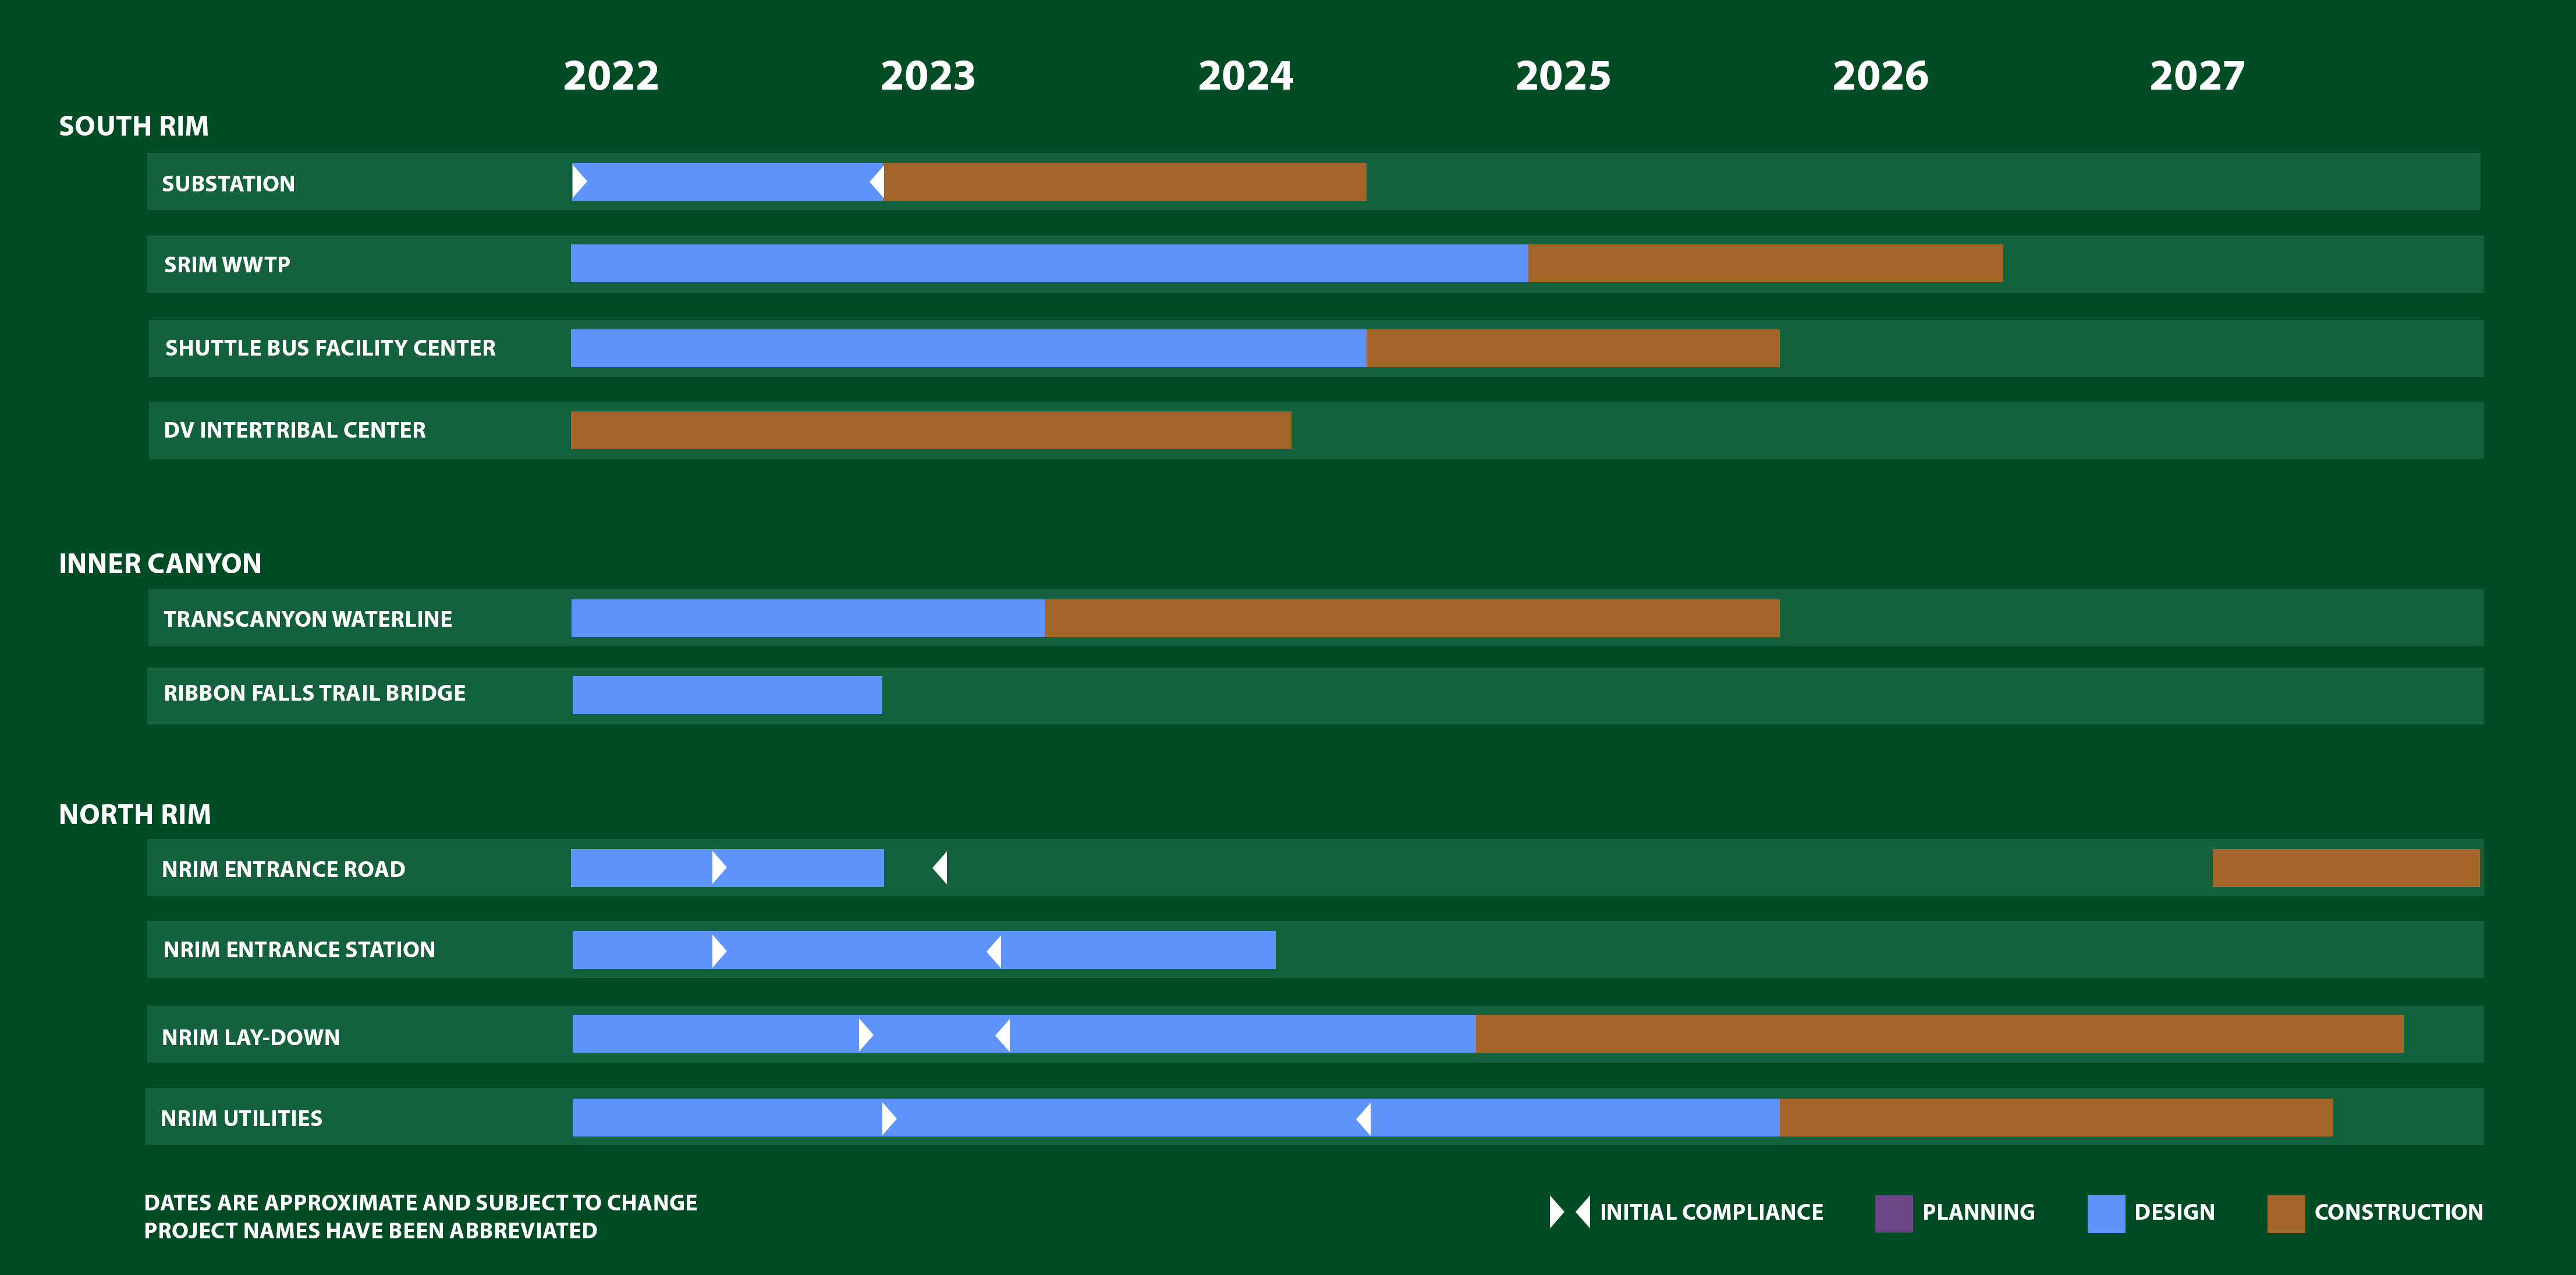 A gantt chart depicting the design and construction timeline for large-scale projects at Grand Canyon National Park for 2022-27